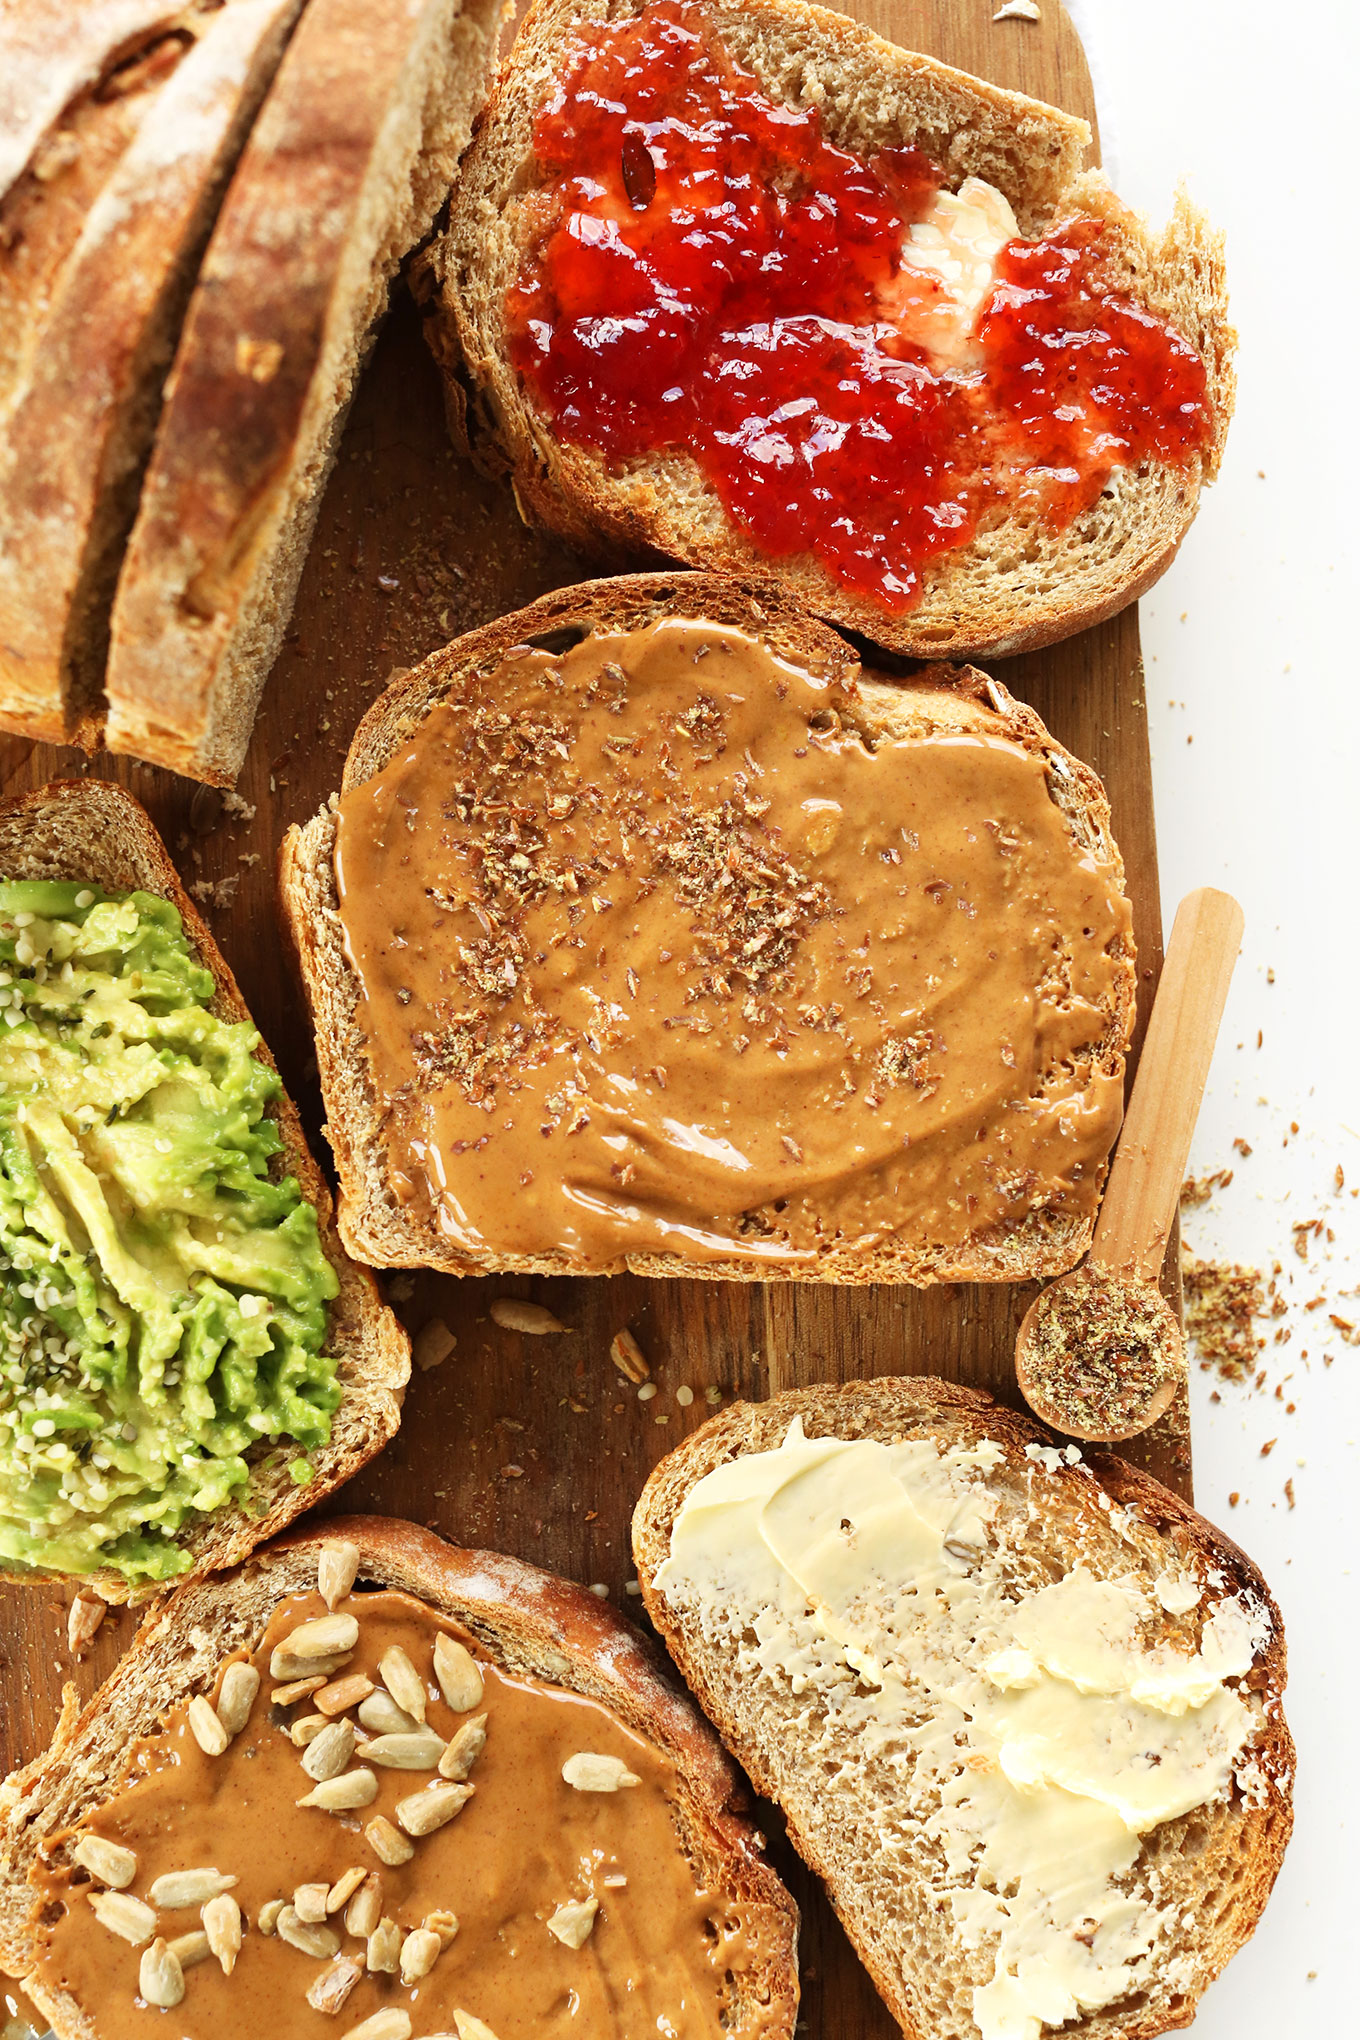 Slices of simple homemade Whole Grain Seedy Vegan Bread with various toppings